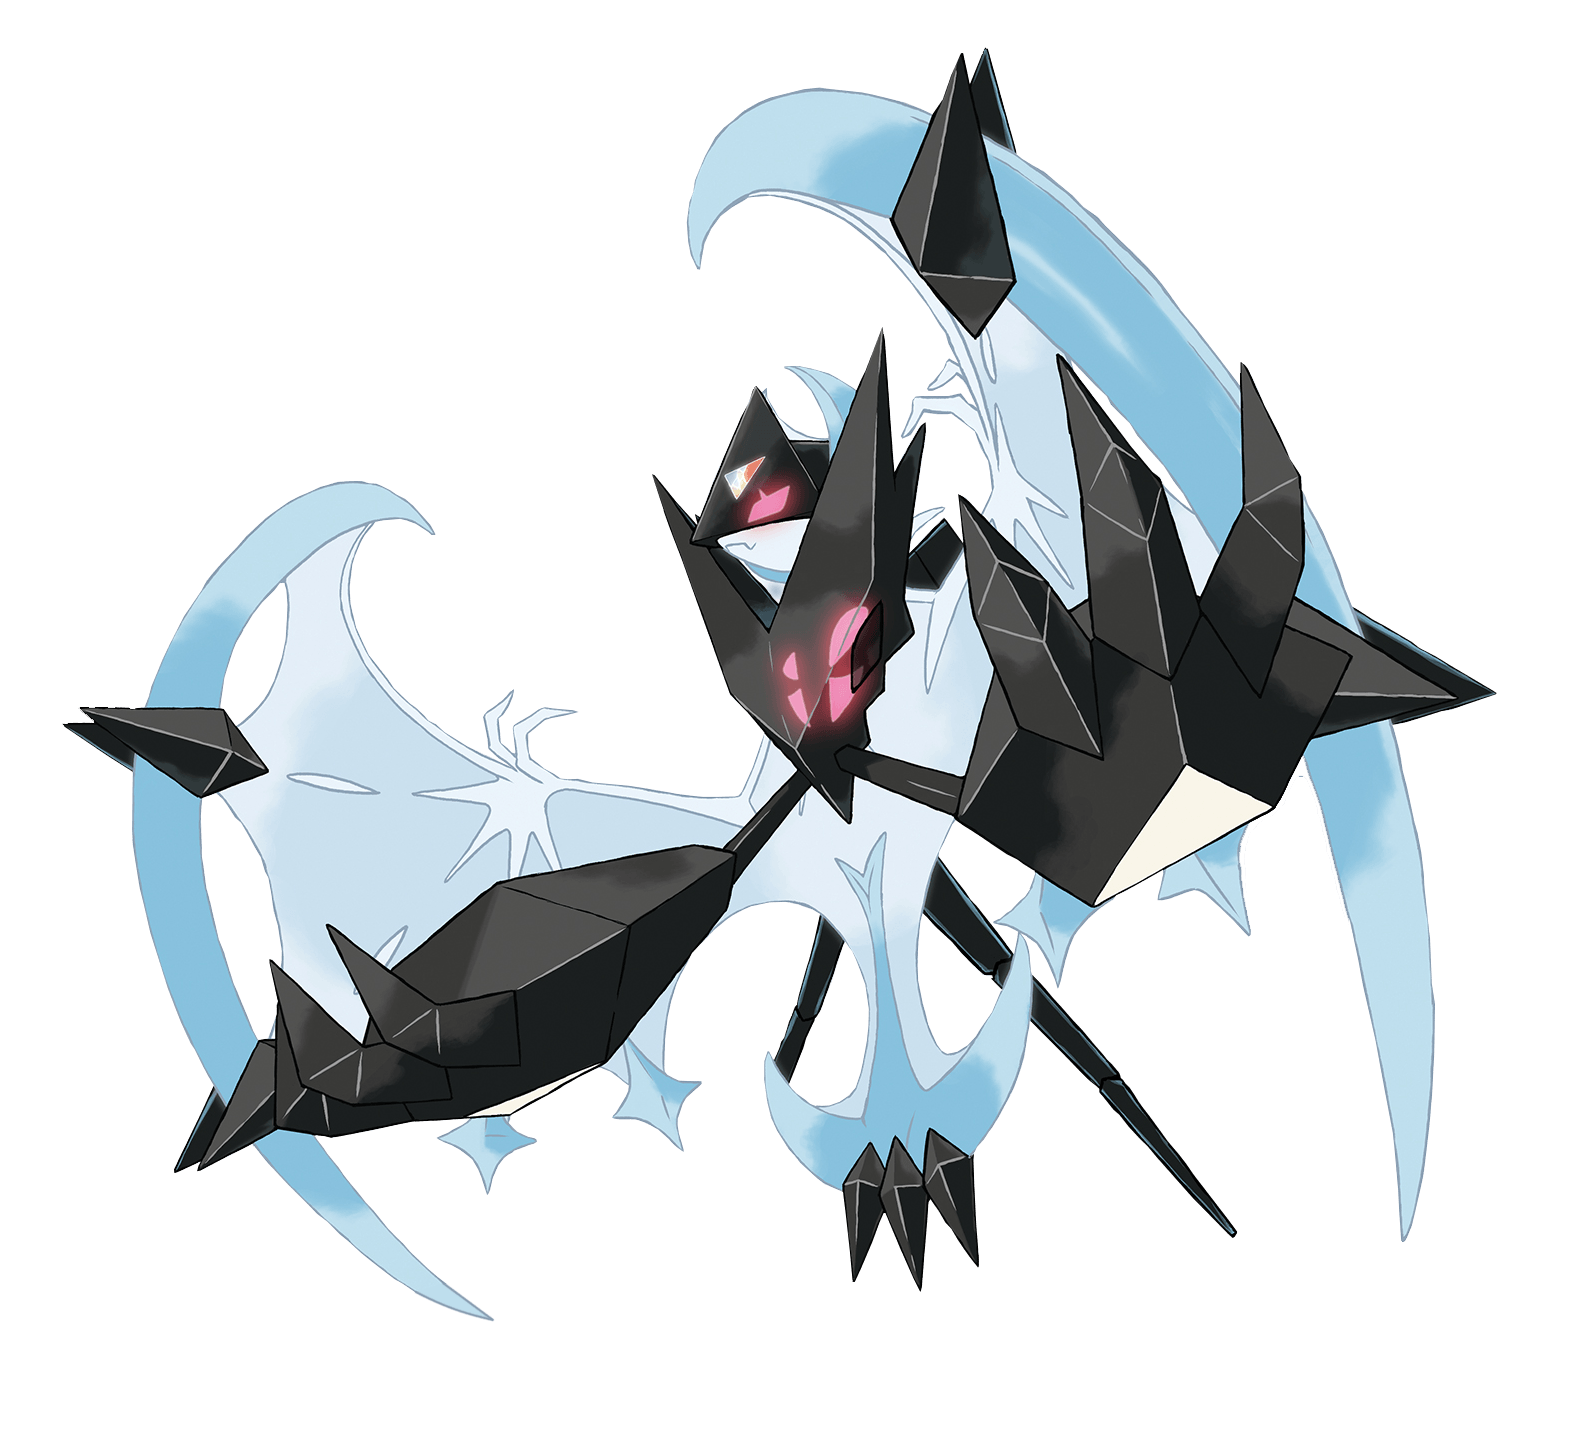 HD transparent image of Necrozma Dawn Wings, feel free to use it